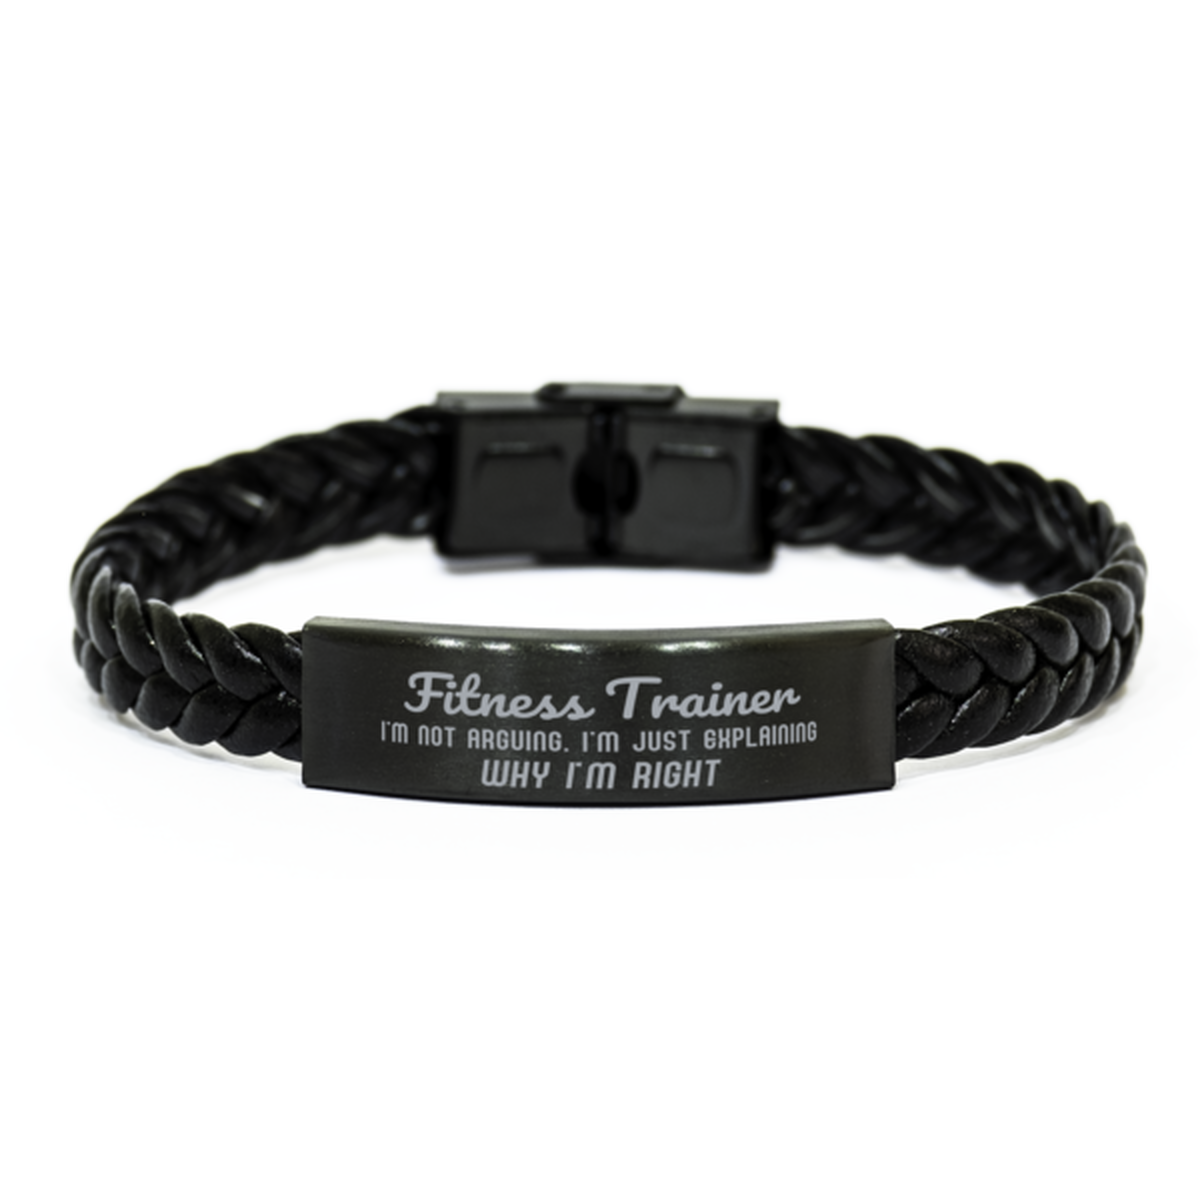 Fitness Trainer I'm not Arguing. I'm Just Explaining Why I'm RIGHT Braided Leather Bracelet, Graduation Birthday Christmas Fitness Trainer Gifts For Fitness Trainer Funny Saying Quote Present for Men Women Coworker